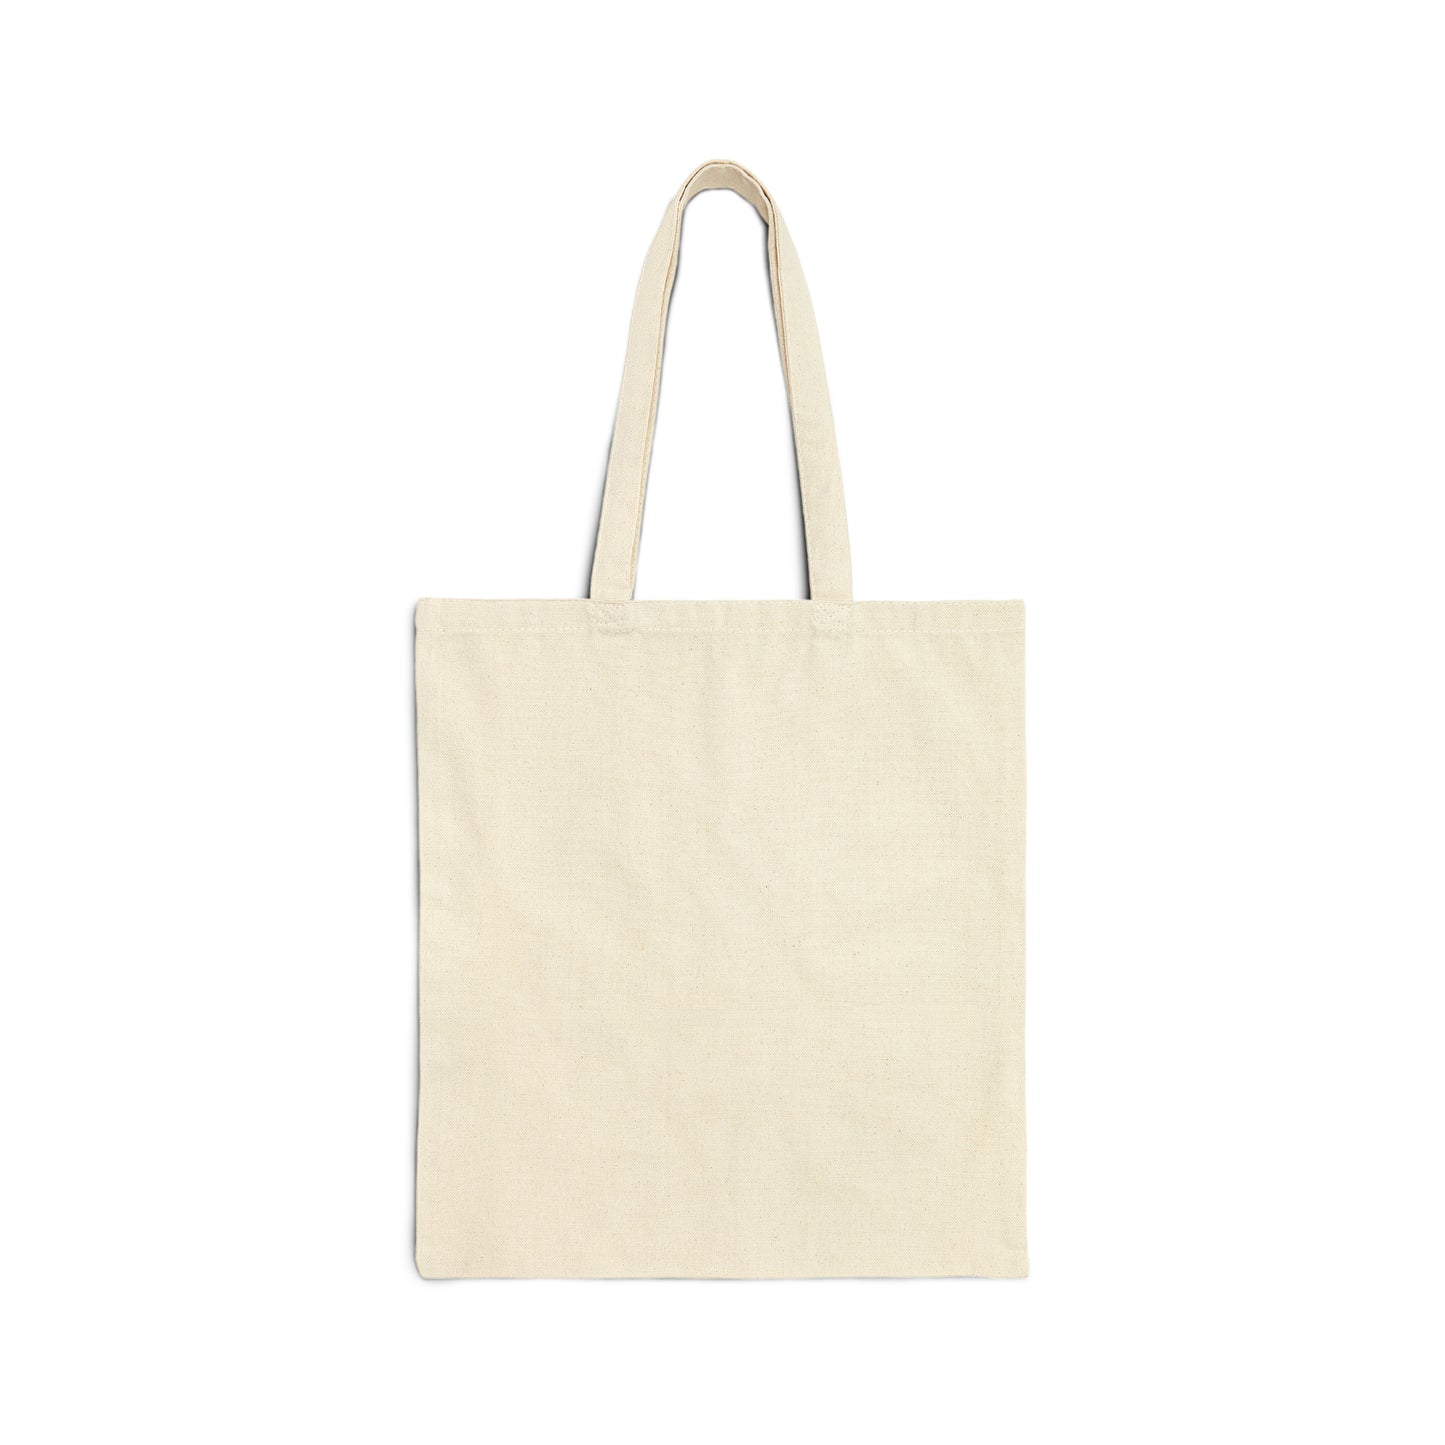 the STAMP tote